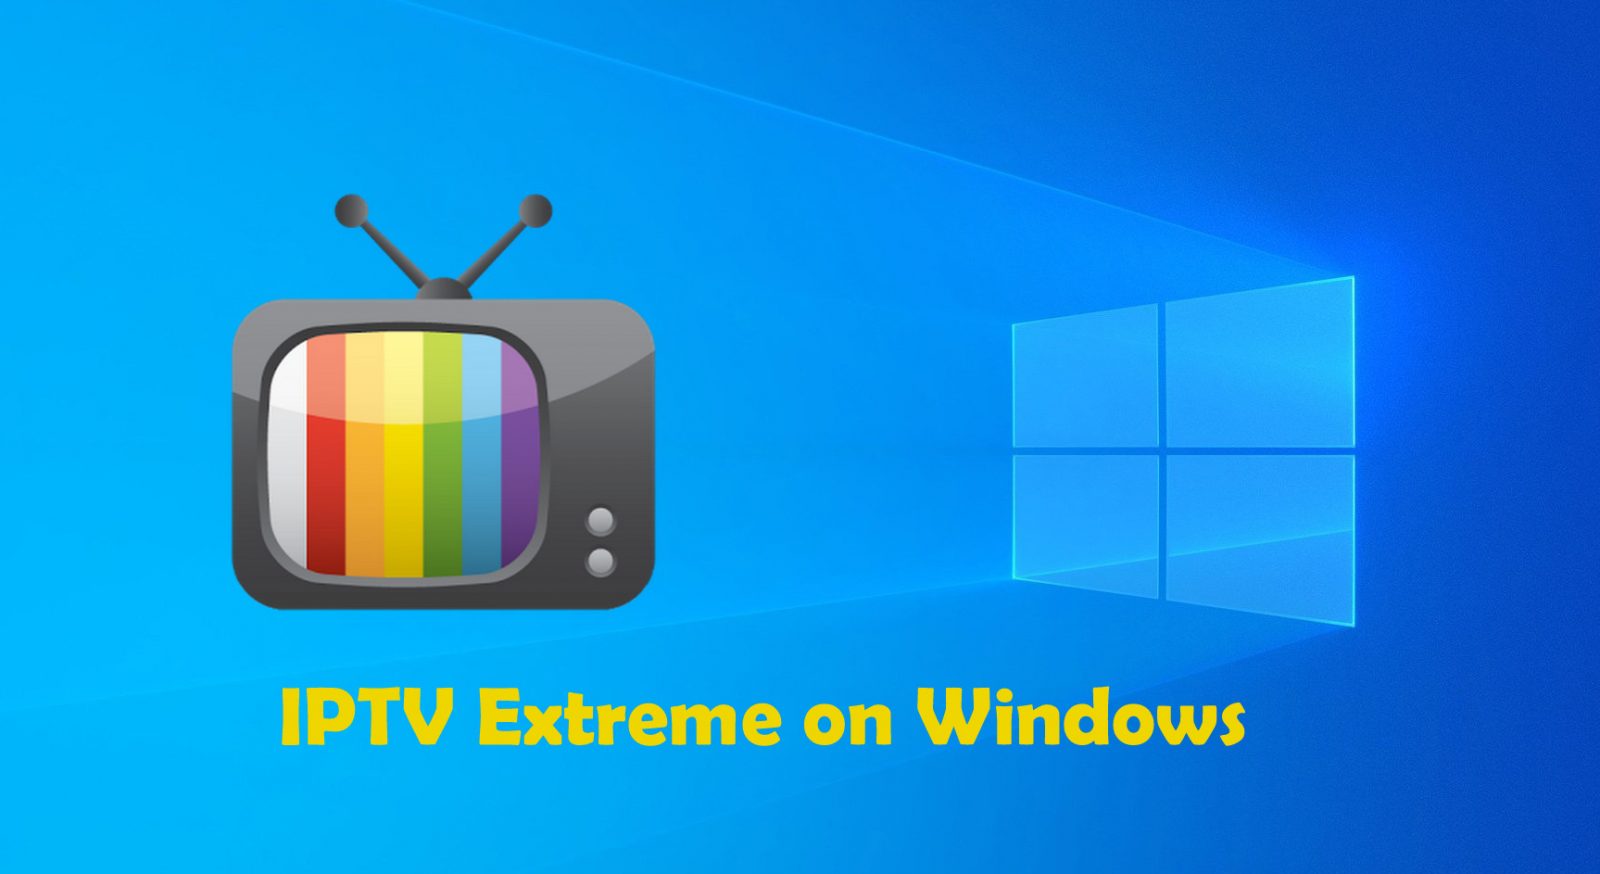 How to install IPTV Extreme for Windows?